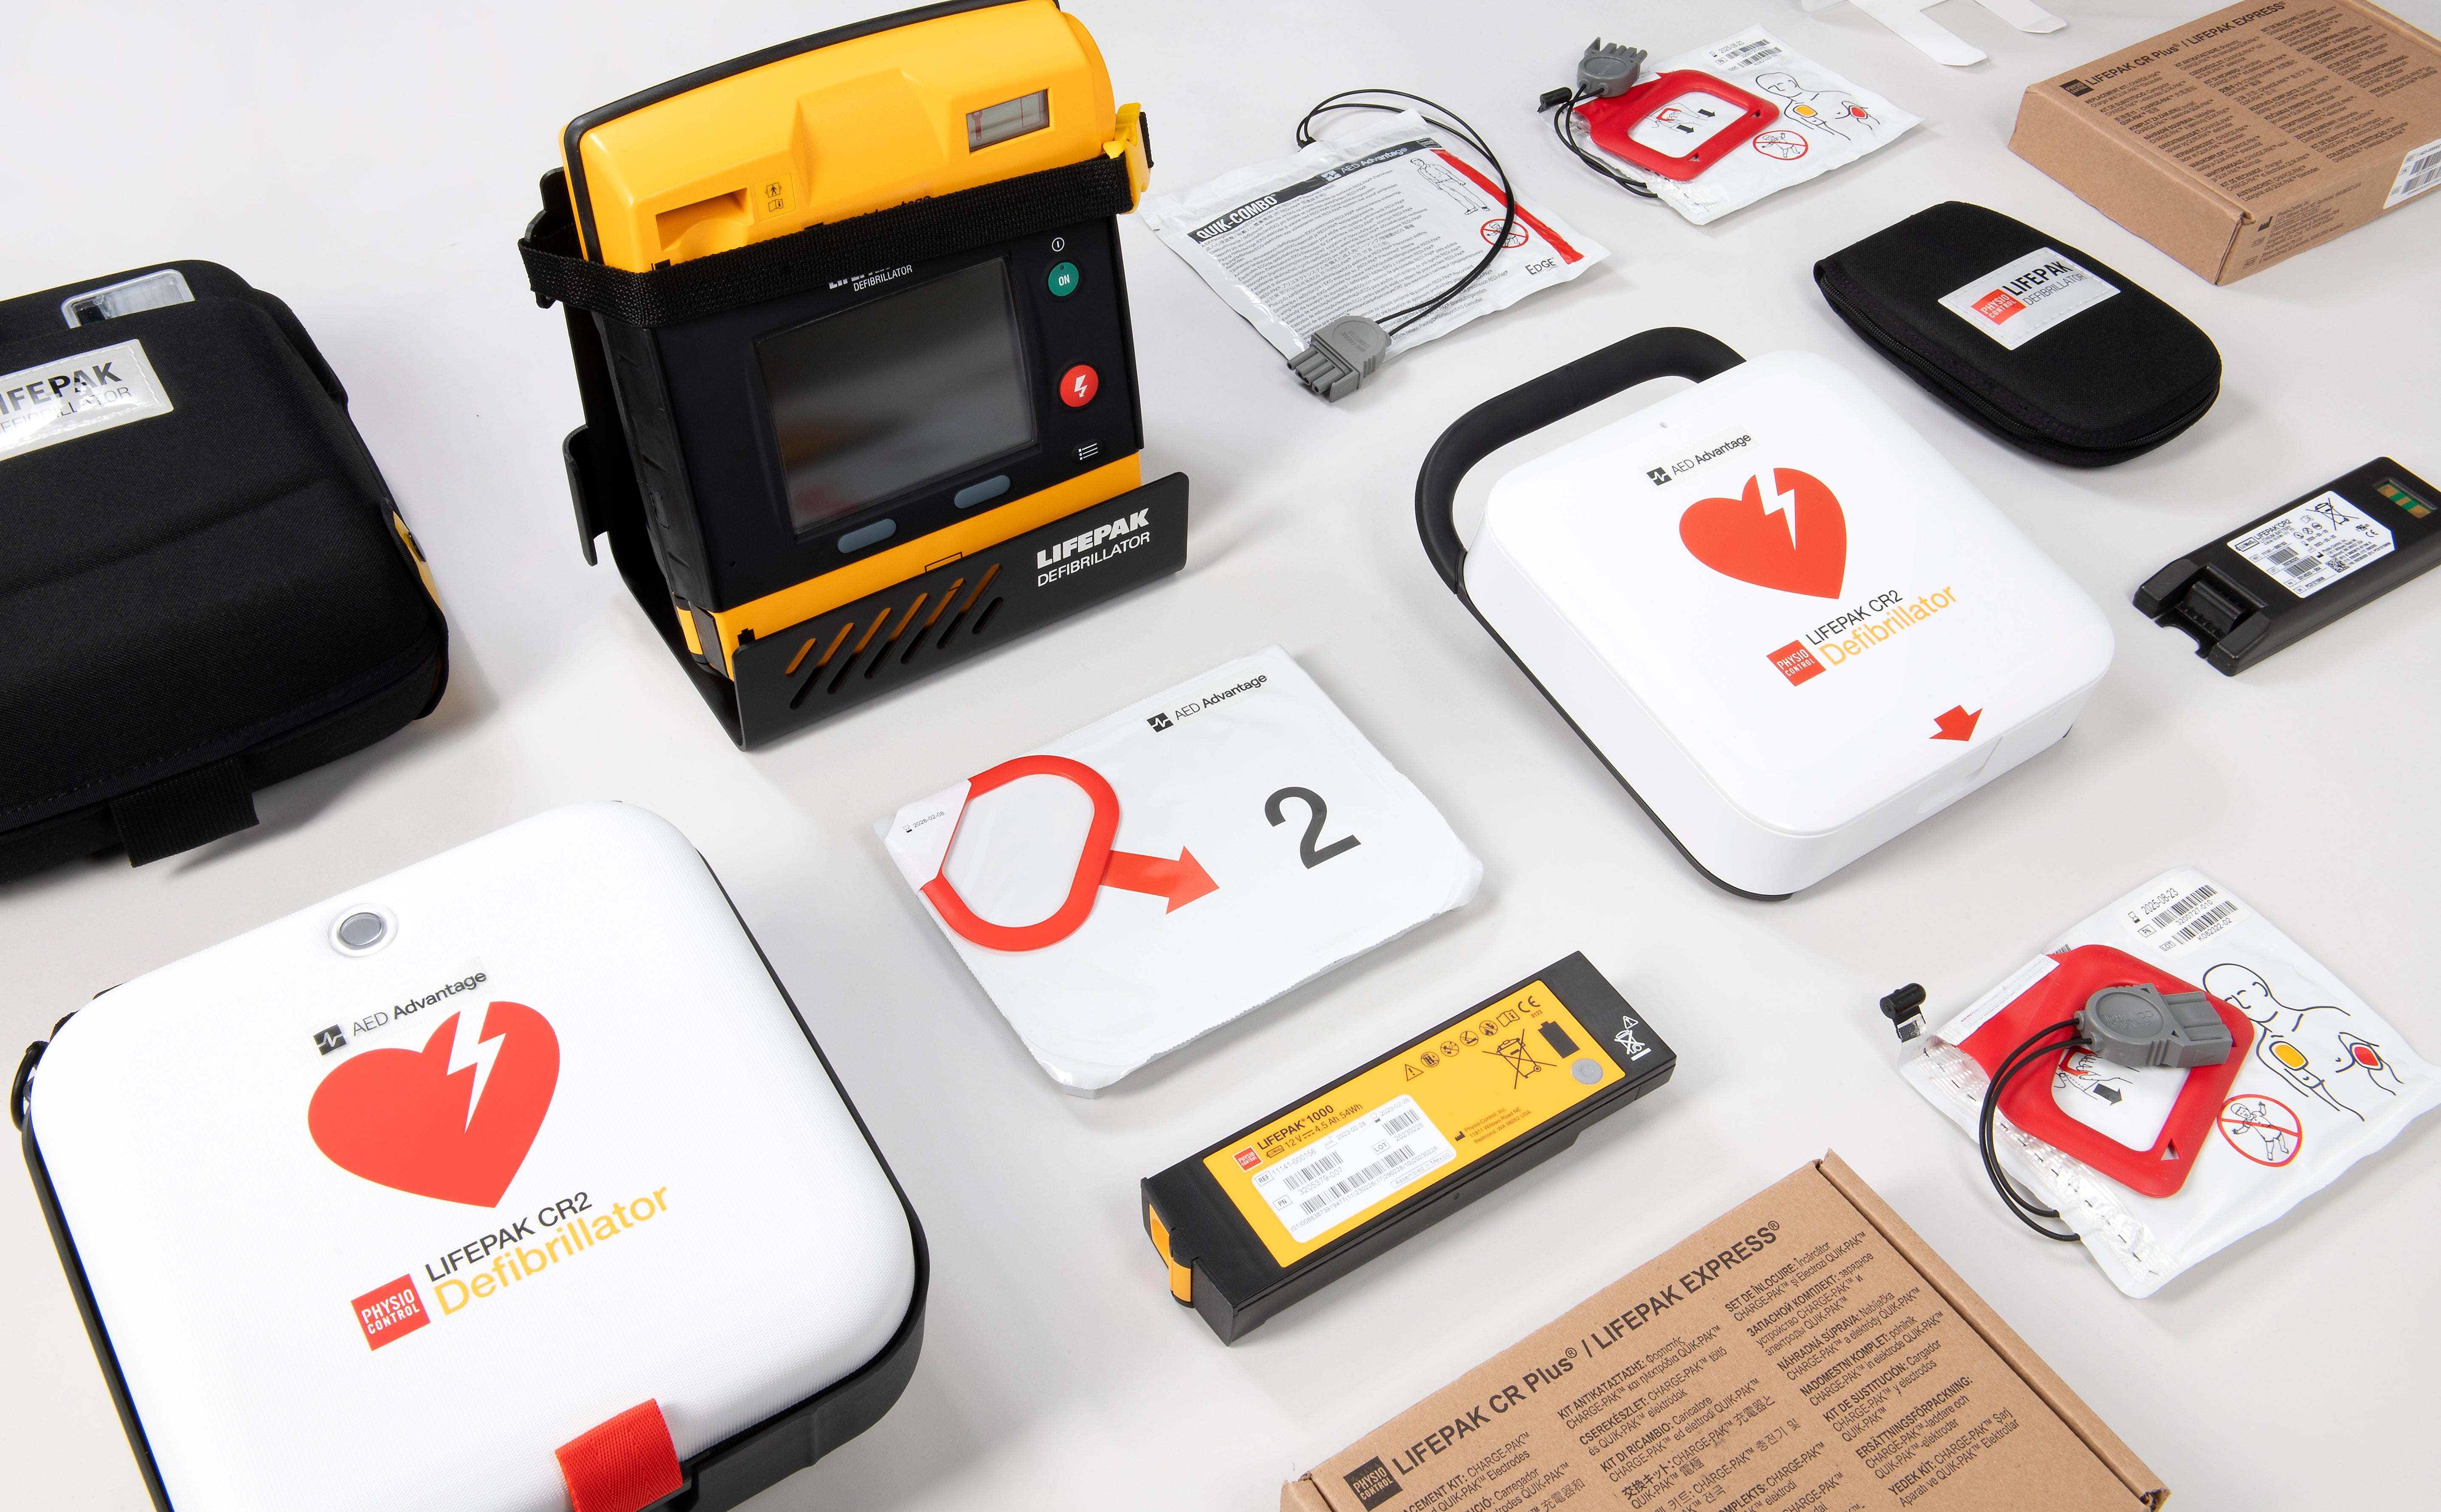 A collage of LIFEPAK AEDs and their accessories of various colors.